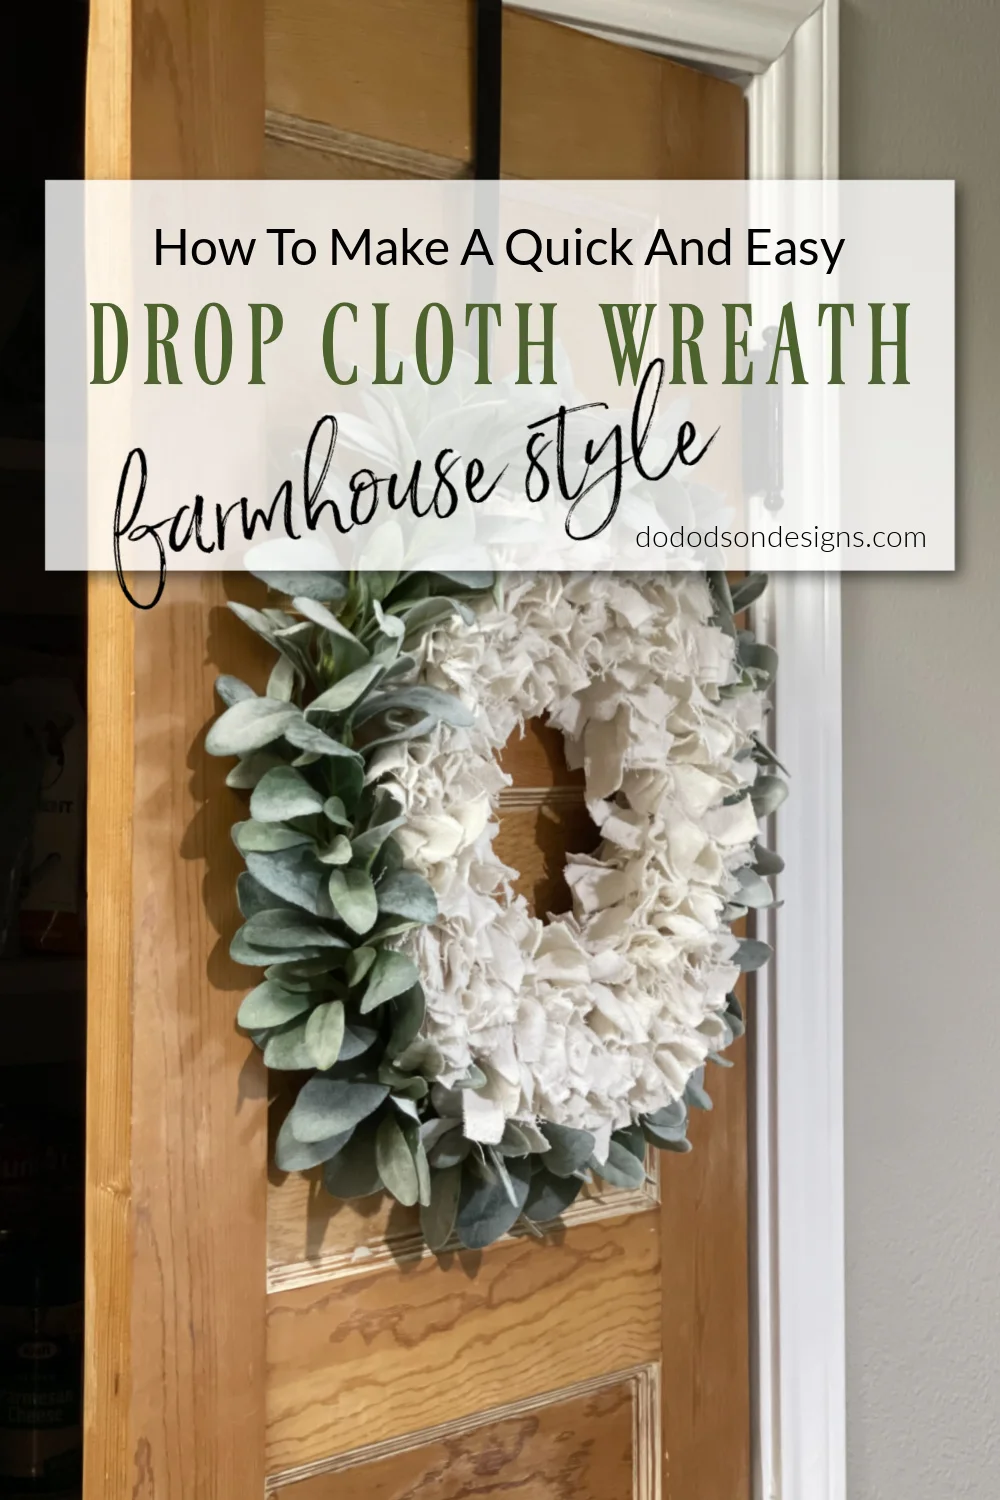 How To Make A Quick And Easy Drop Cloth Wreath With Photos